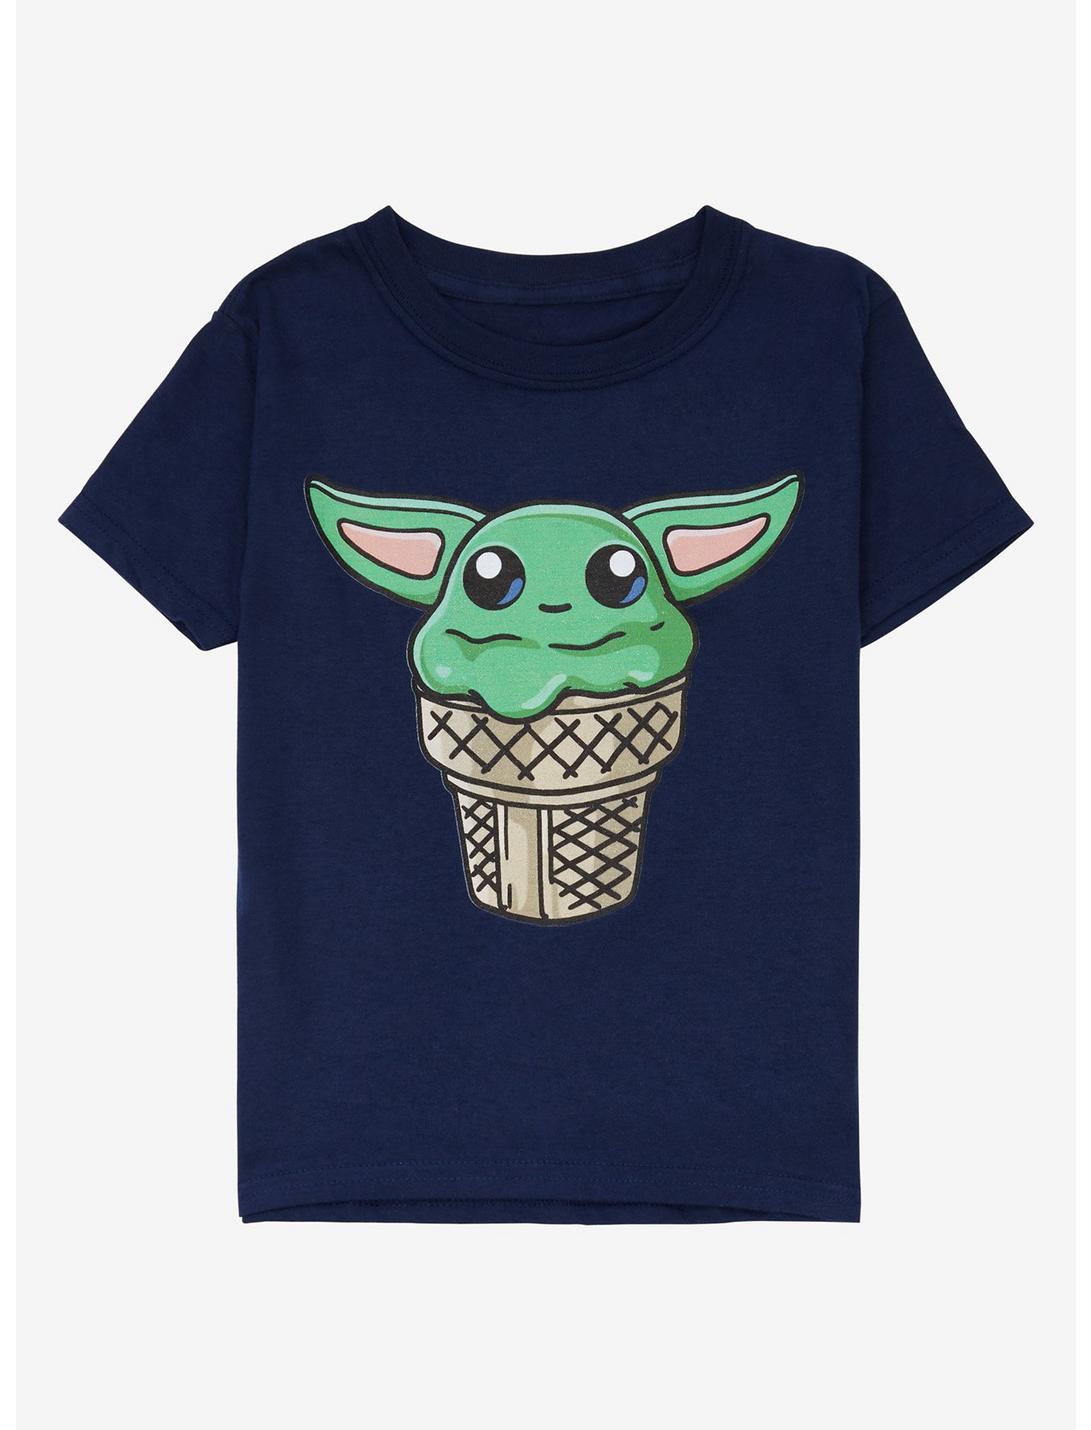 Star Wars The Mandalorian The Child Ice Cream Toddler T-Shirt, FOREST GREEN, hi-res